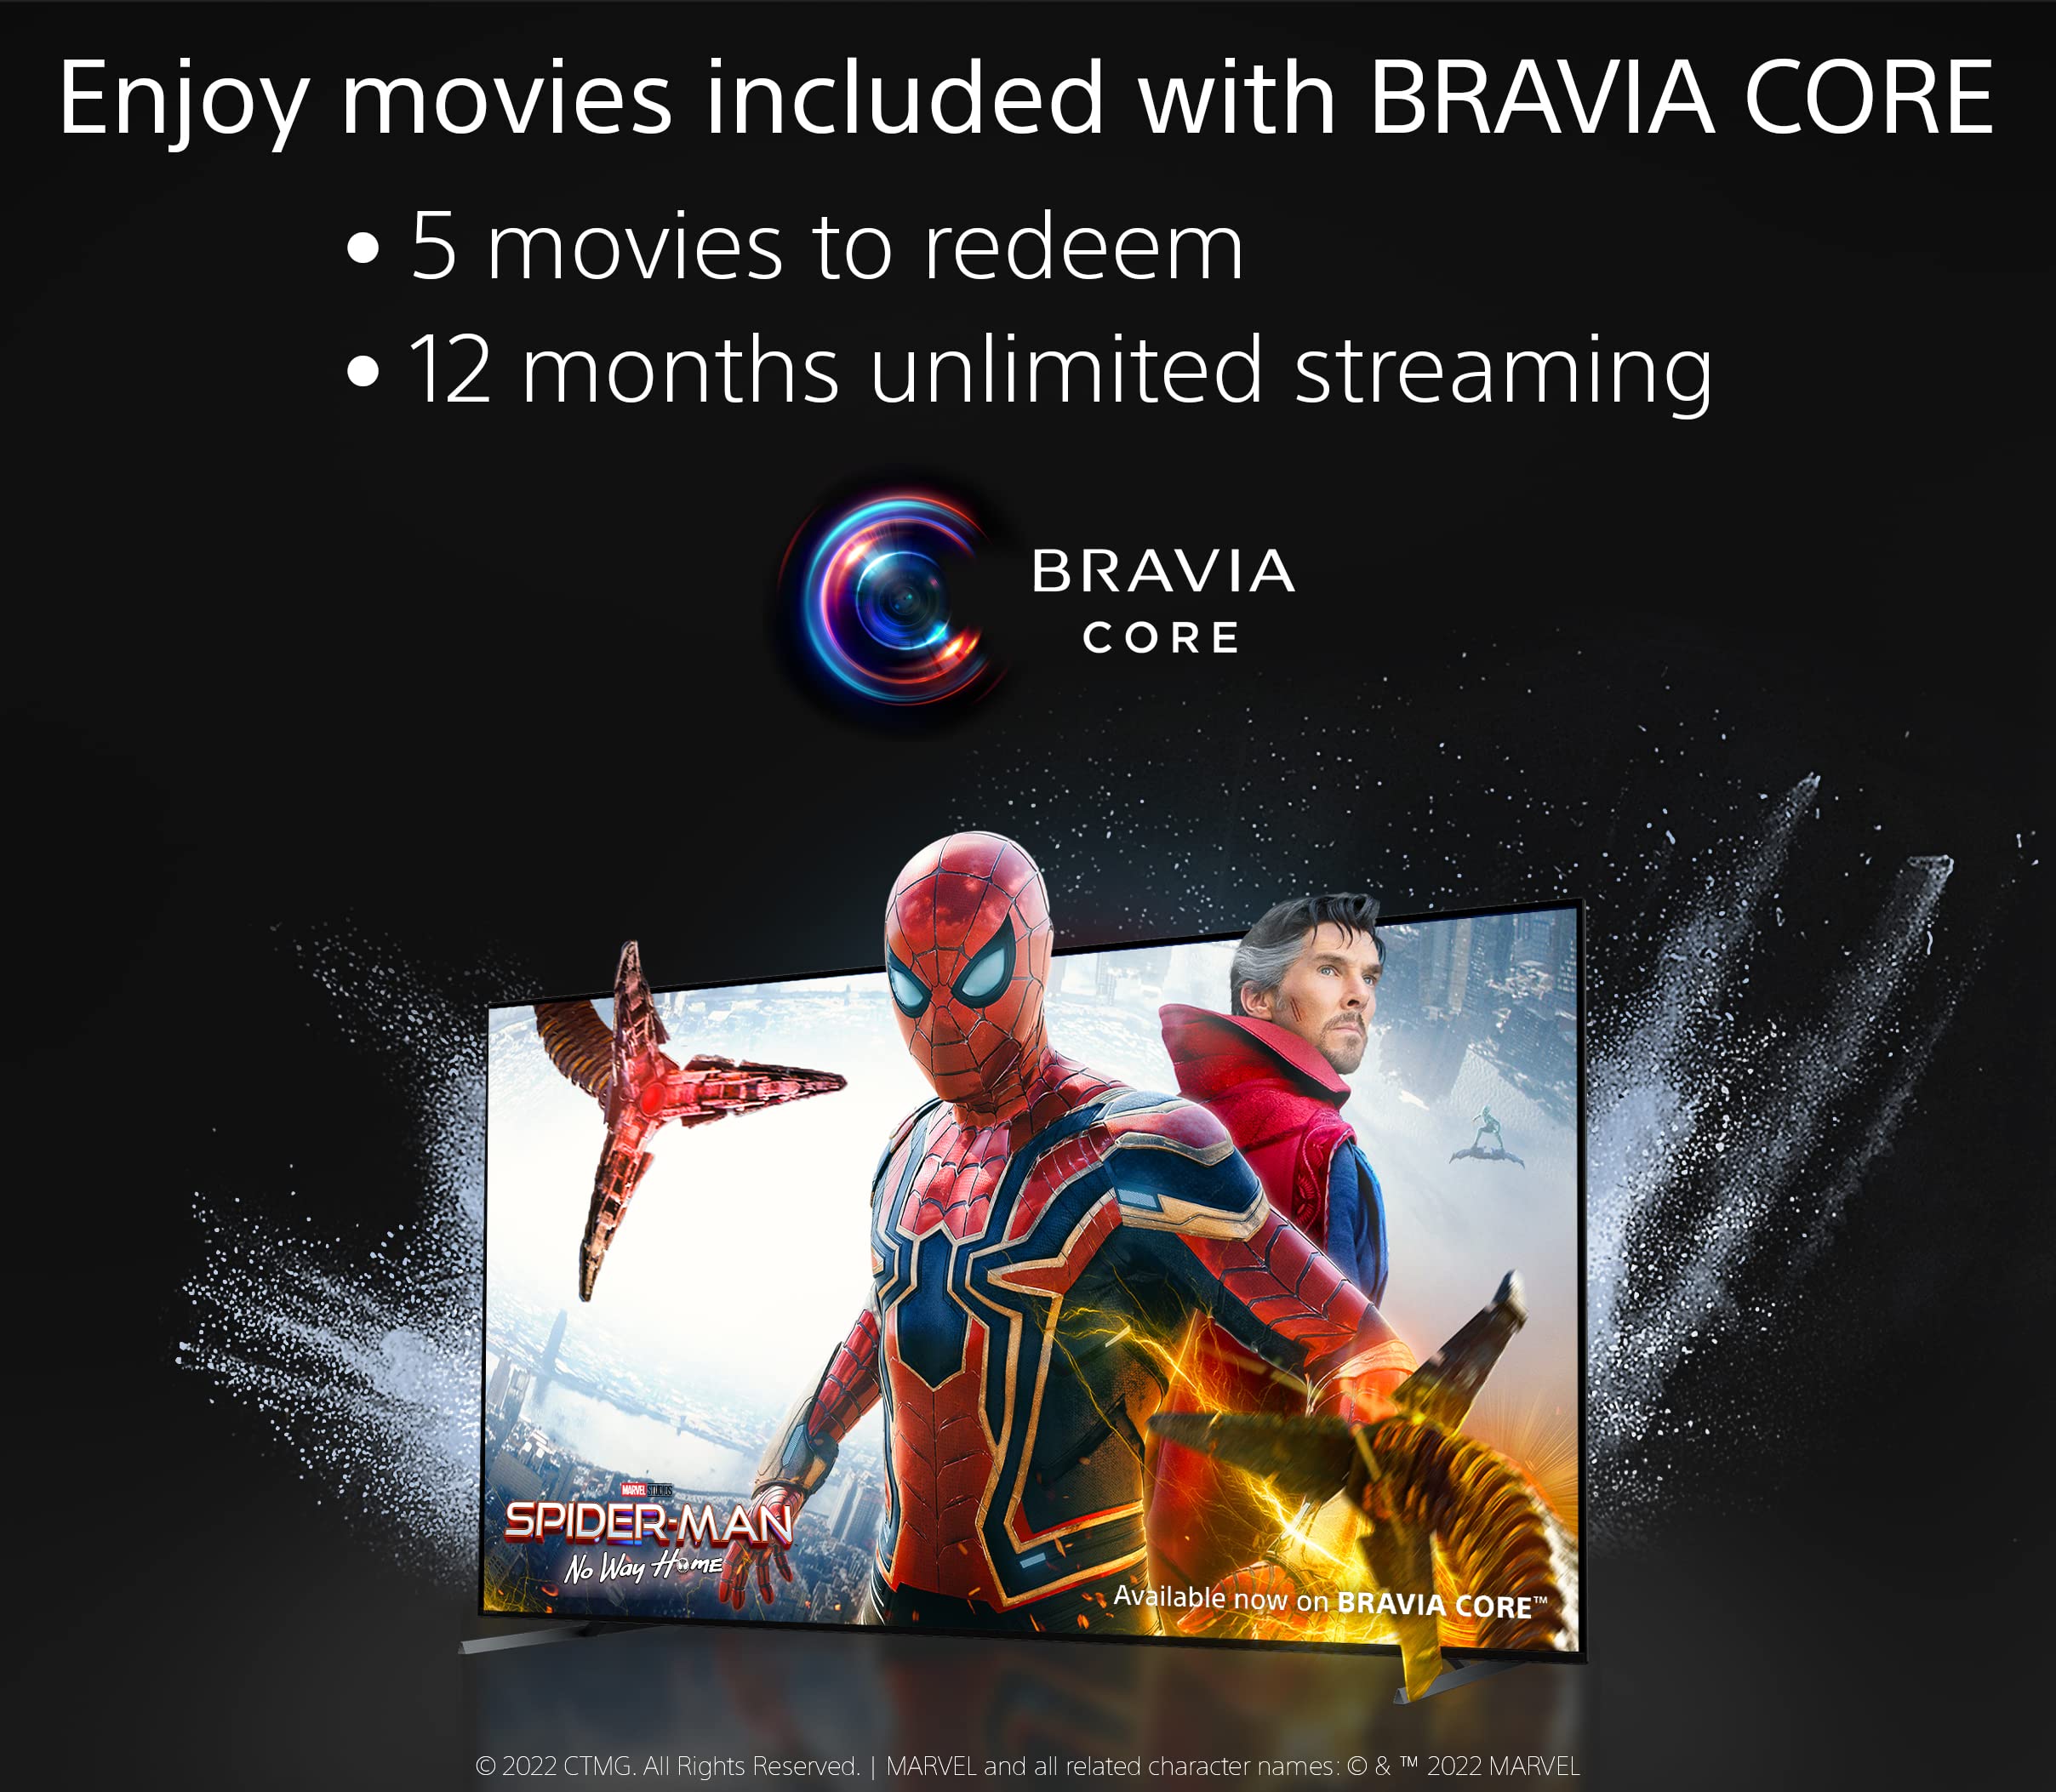 Sony 75 Inch 4K Ultra HD TV X90K Series: BRAVIA XR Full Array LED Smart Google TV with Dolby Vision HDR and Exclusive Features for The Playstation® 5 XR75X90K- 2022 Model